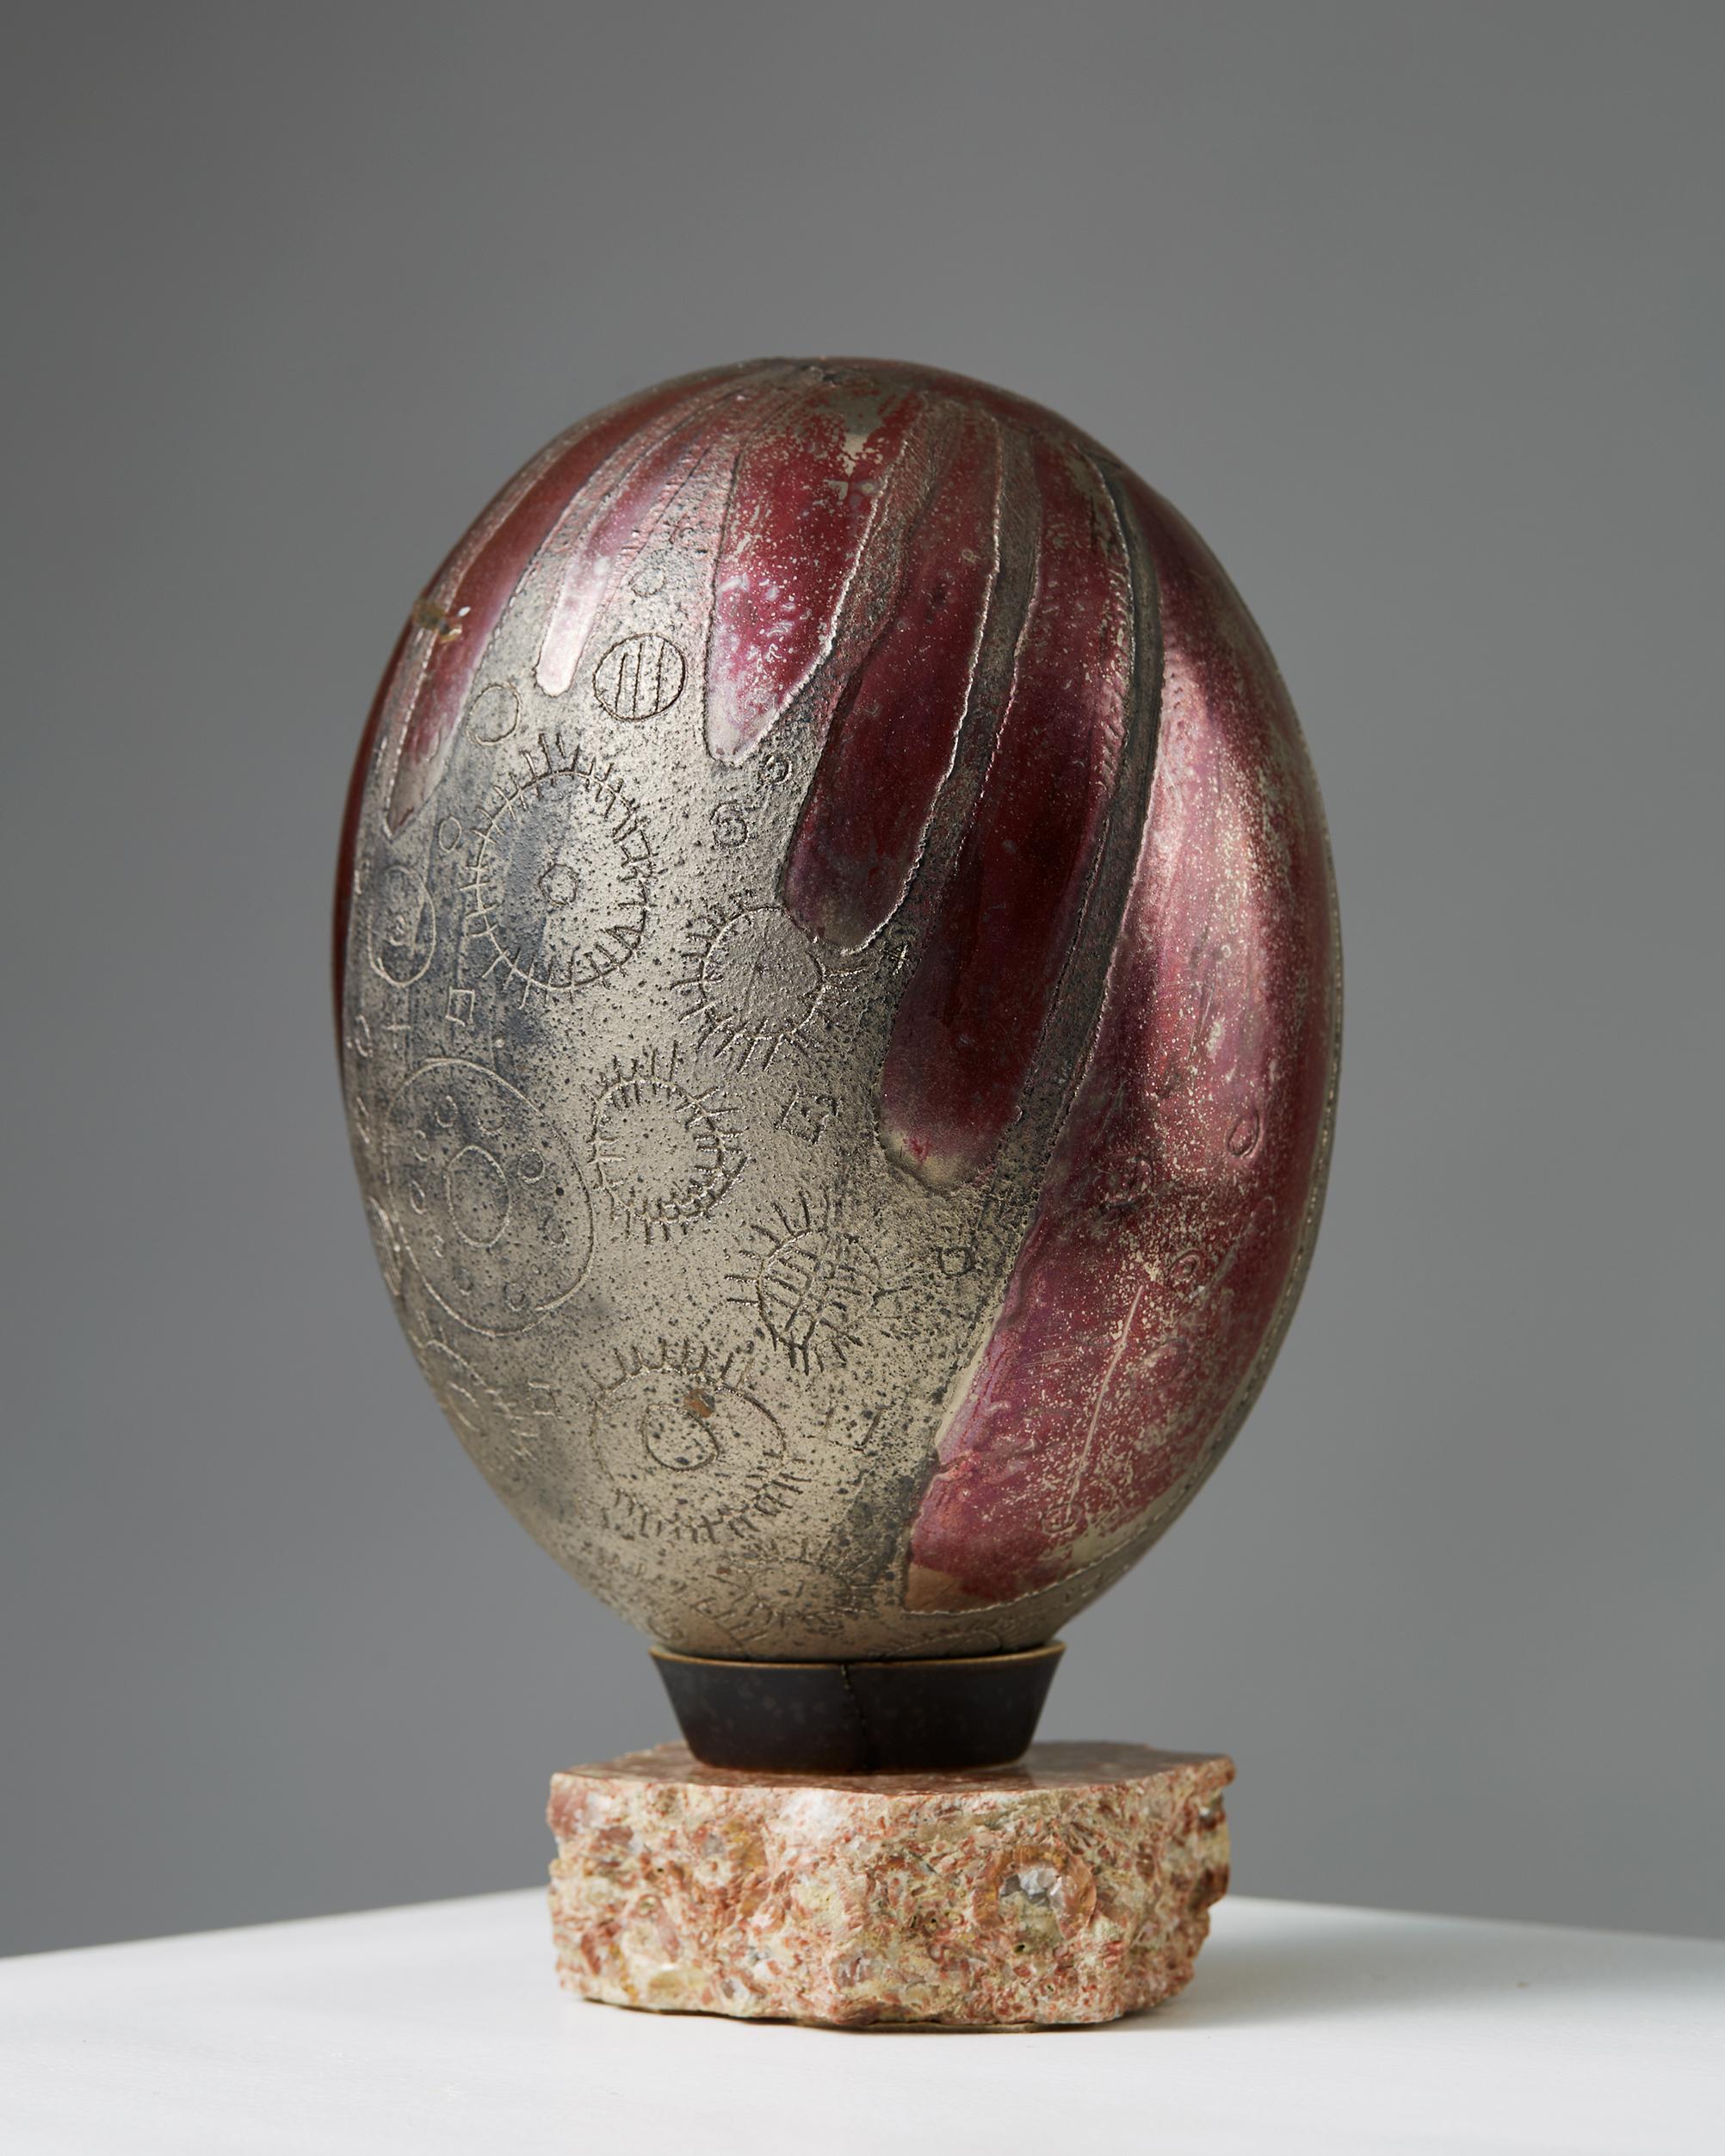 Unique Sculpture, made by Toini Muona,
Finland. 1960s/Early 1970s

Stoneware with a metallic glaze. Support of limestone and porcelain.

Measurements:
H: 21 cm/ 8 1/4